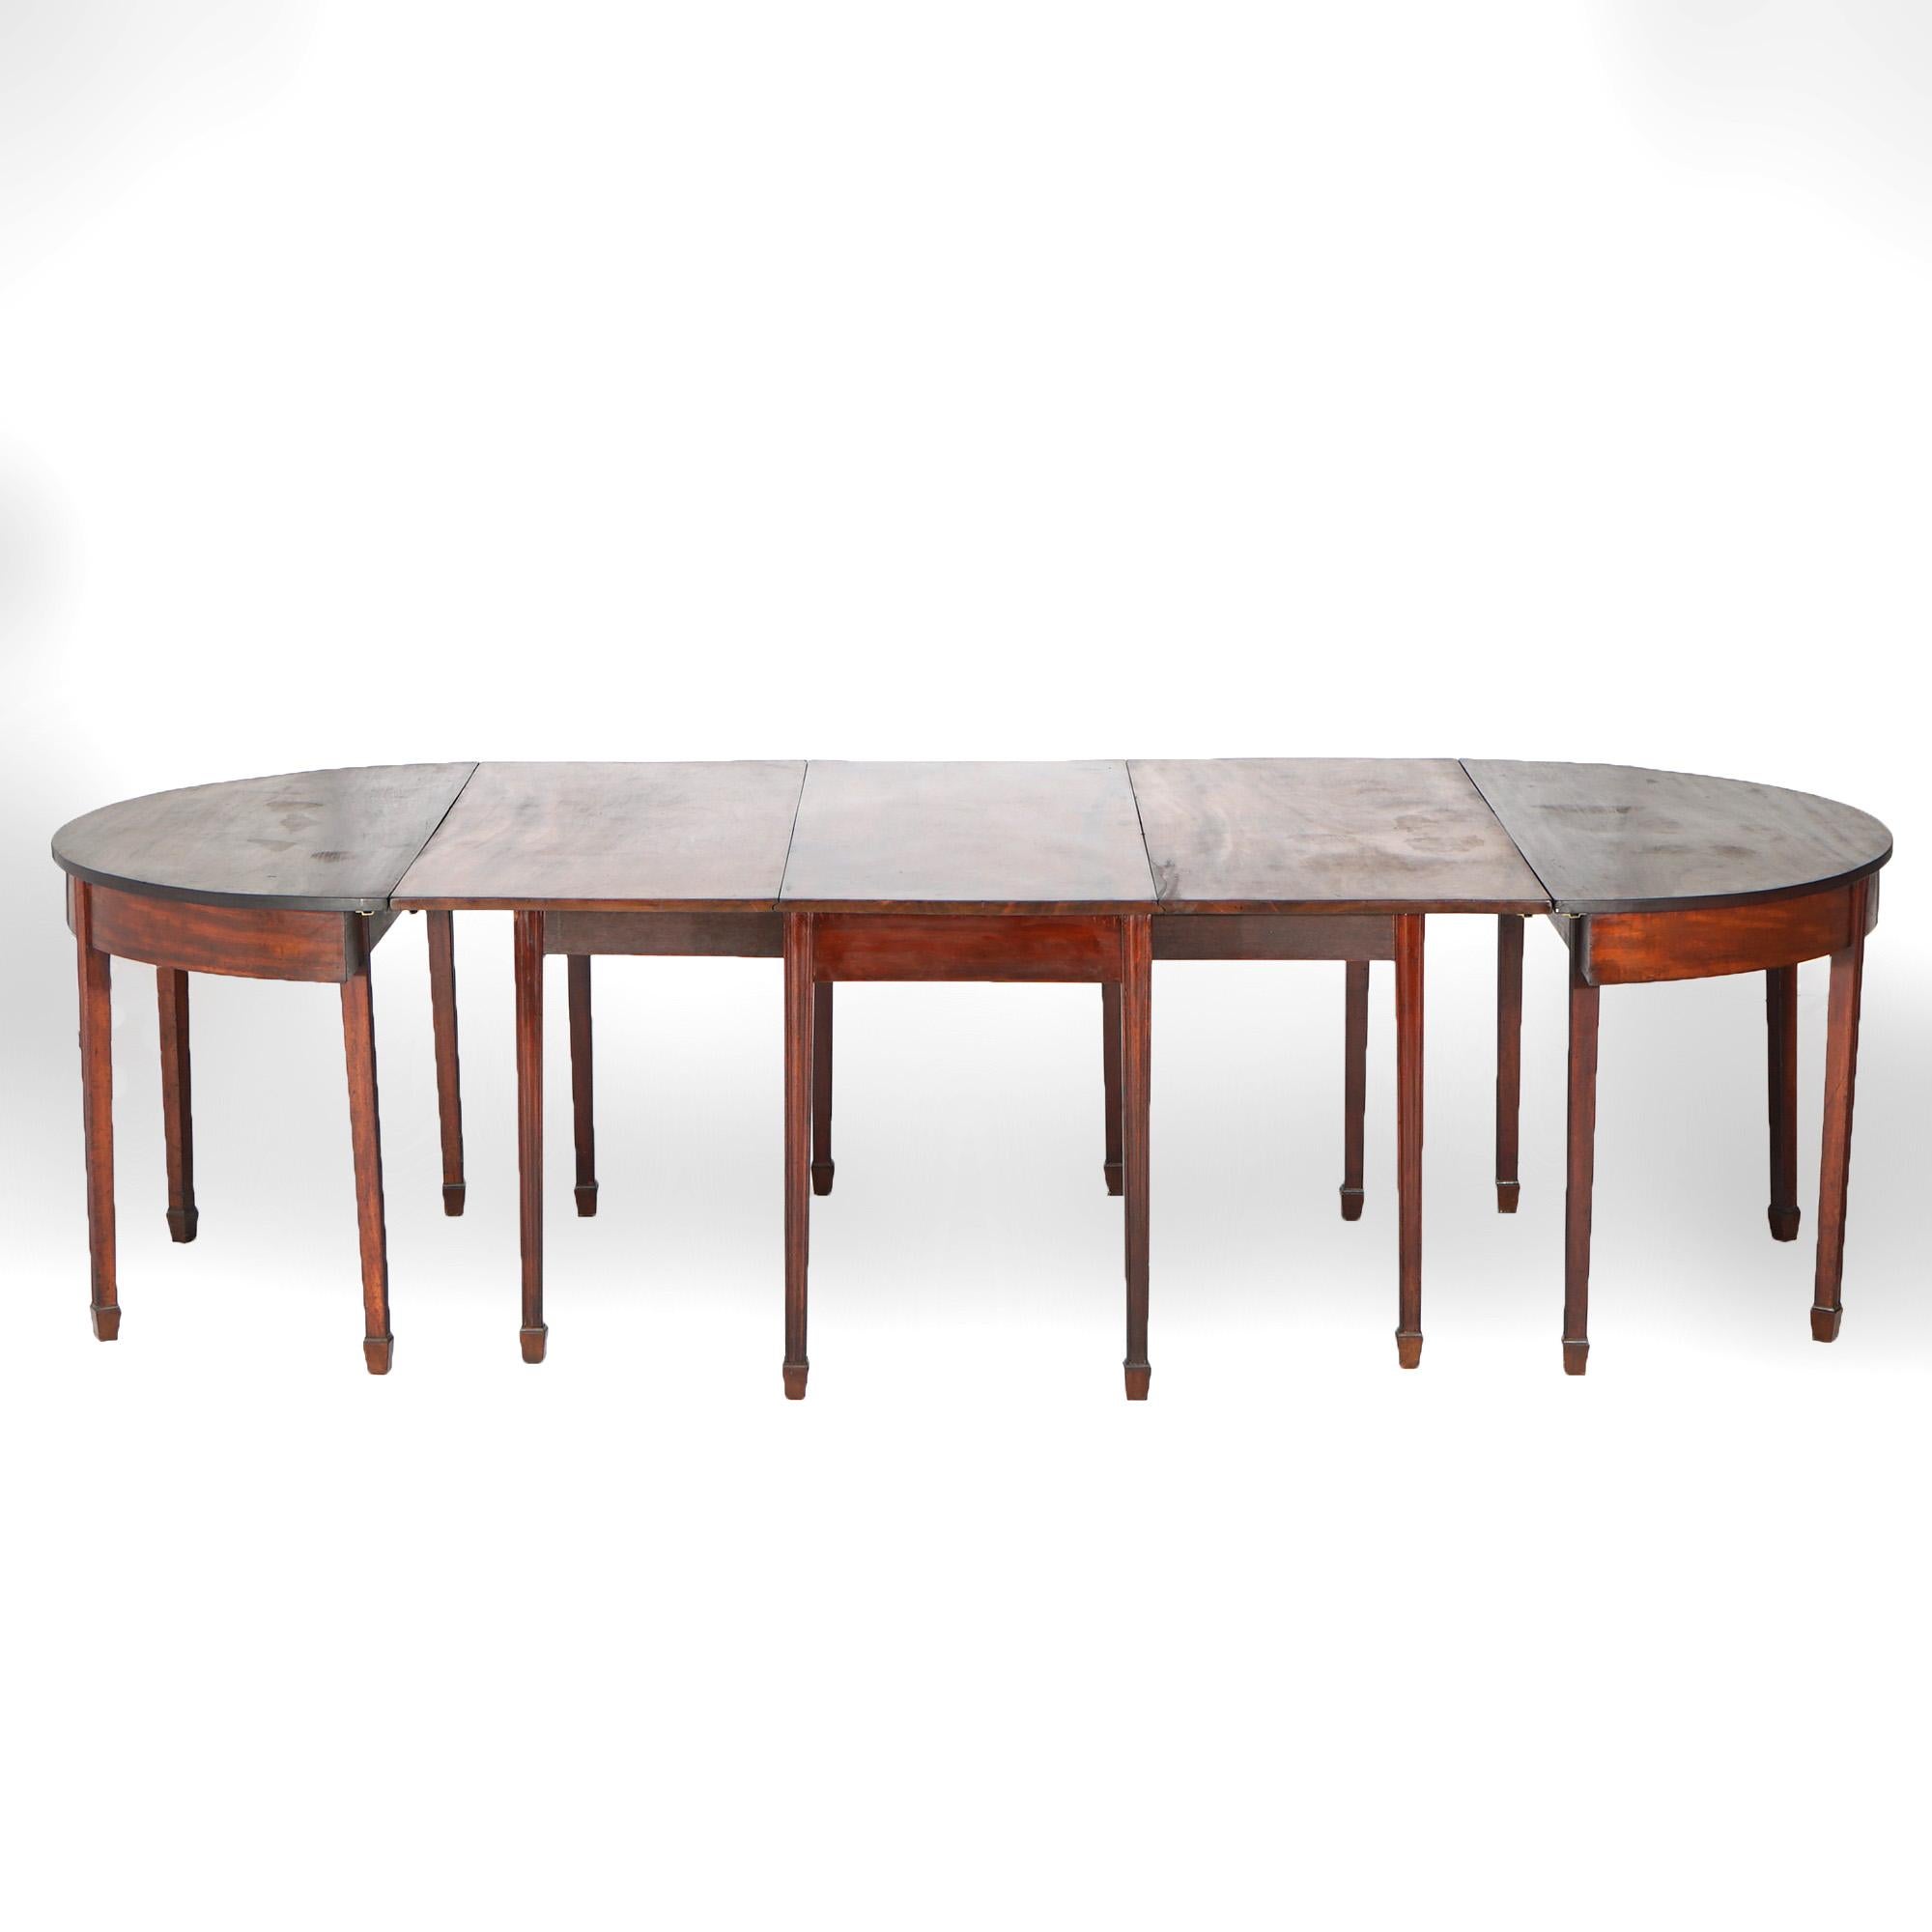 Antique English George III Demi Lune Mahogany Banquet Dining Table Circa 1820 For Sale 15